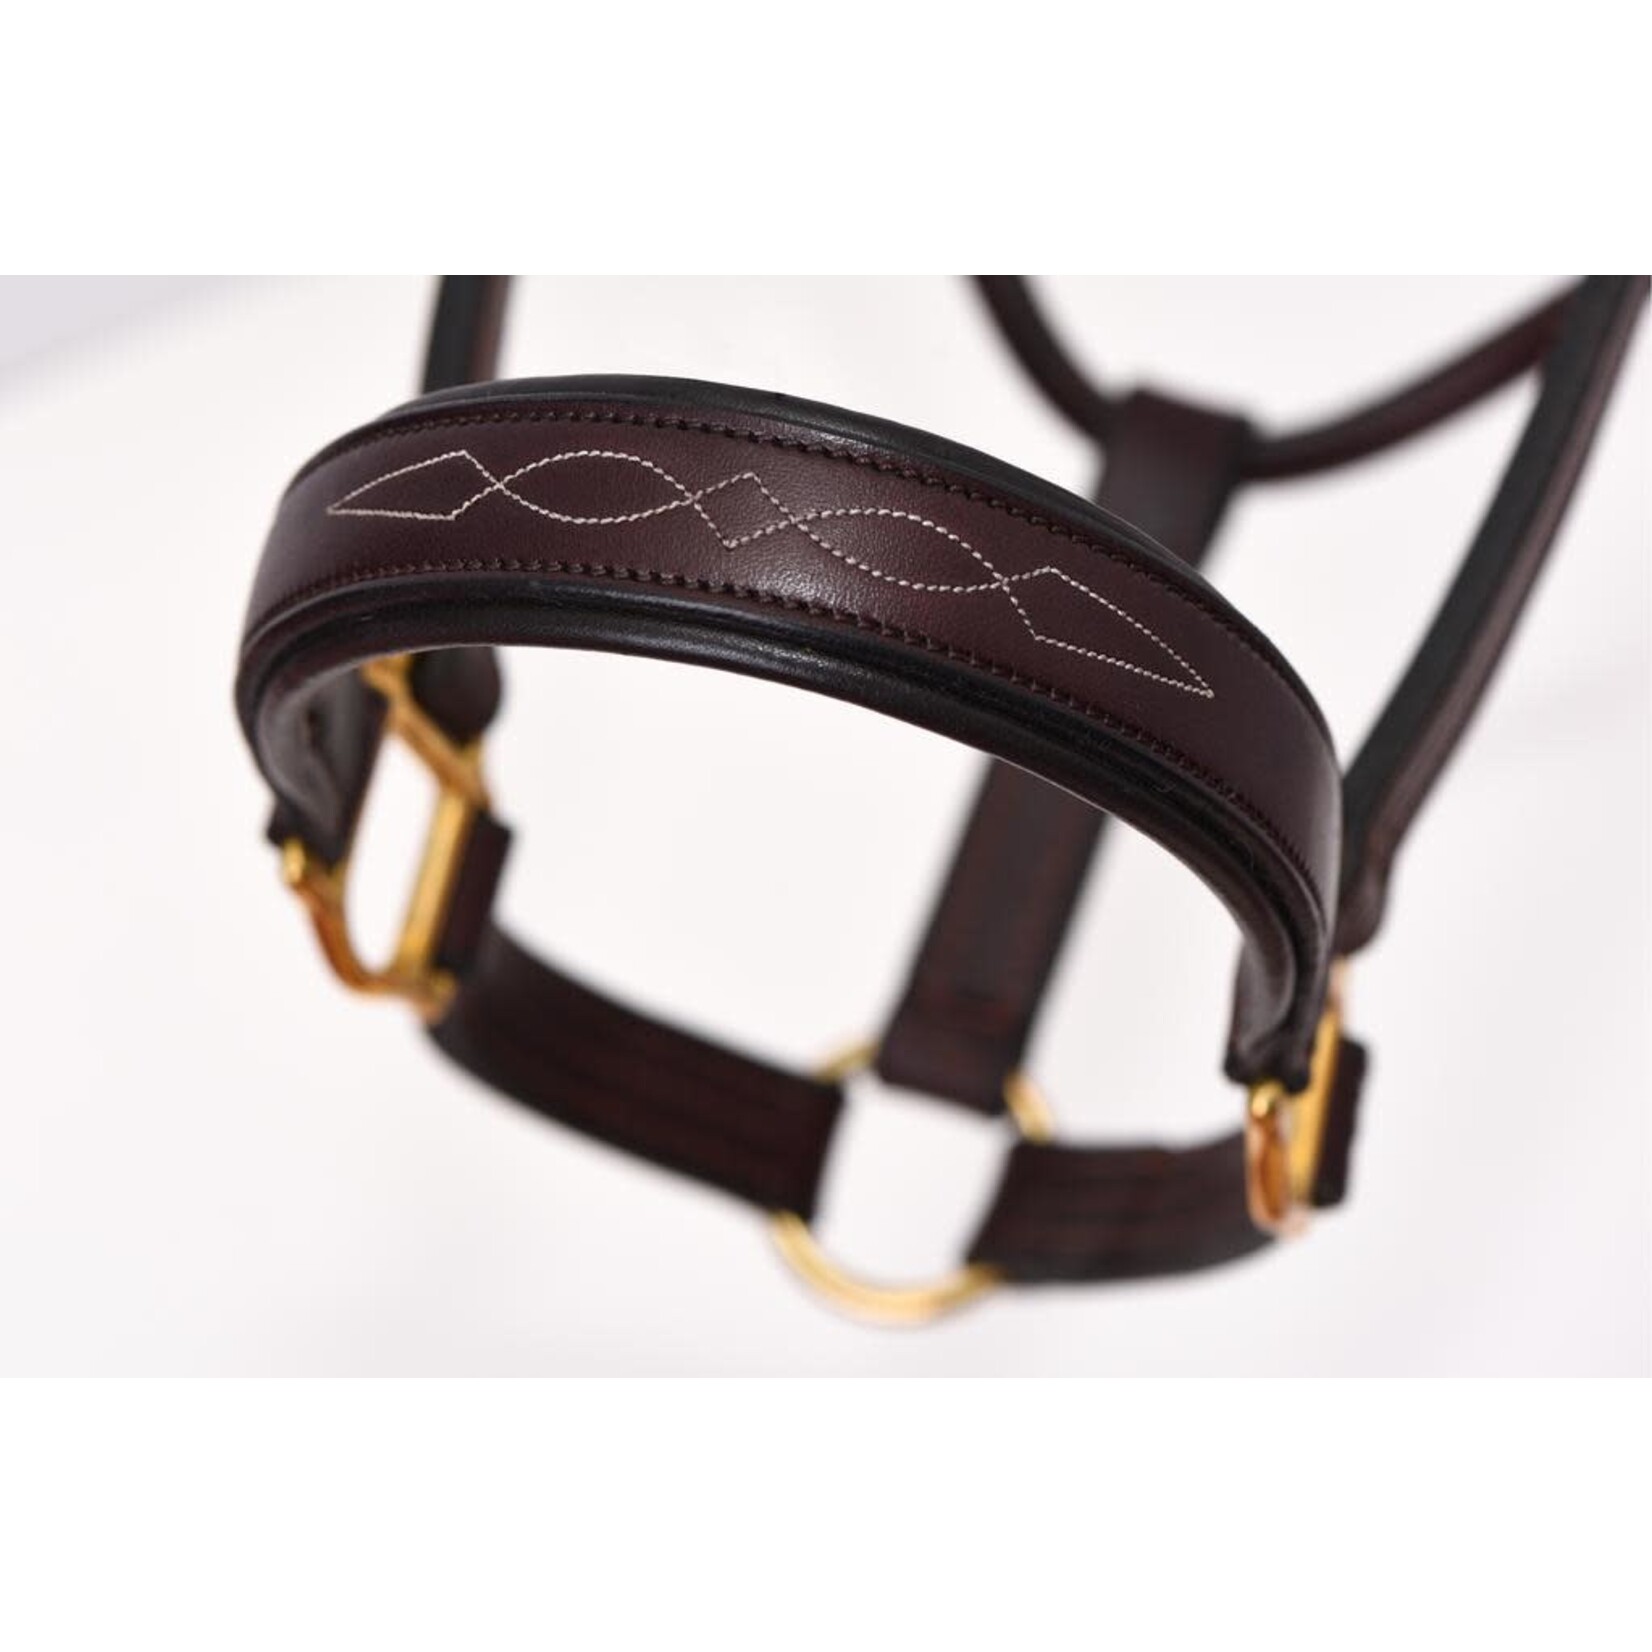 Perri’s Fancy Stitched Horse Leather Halter